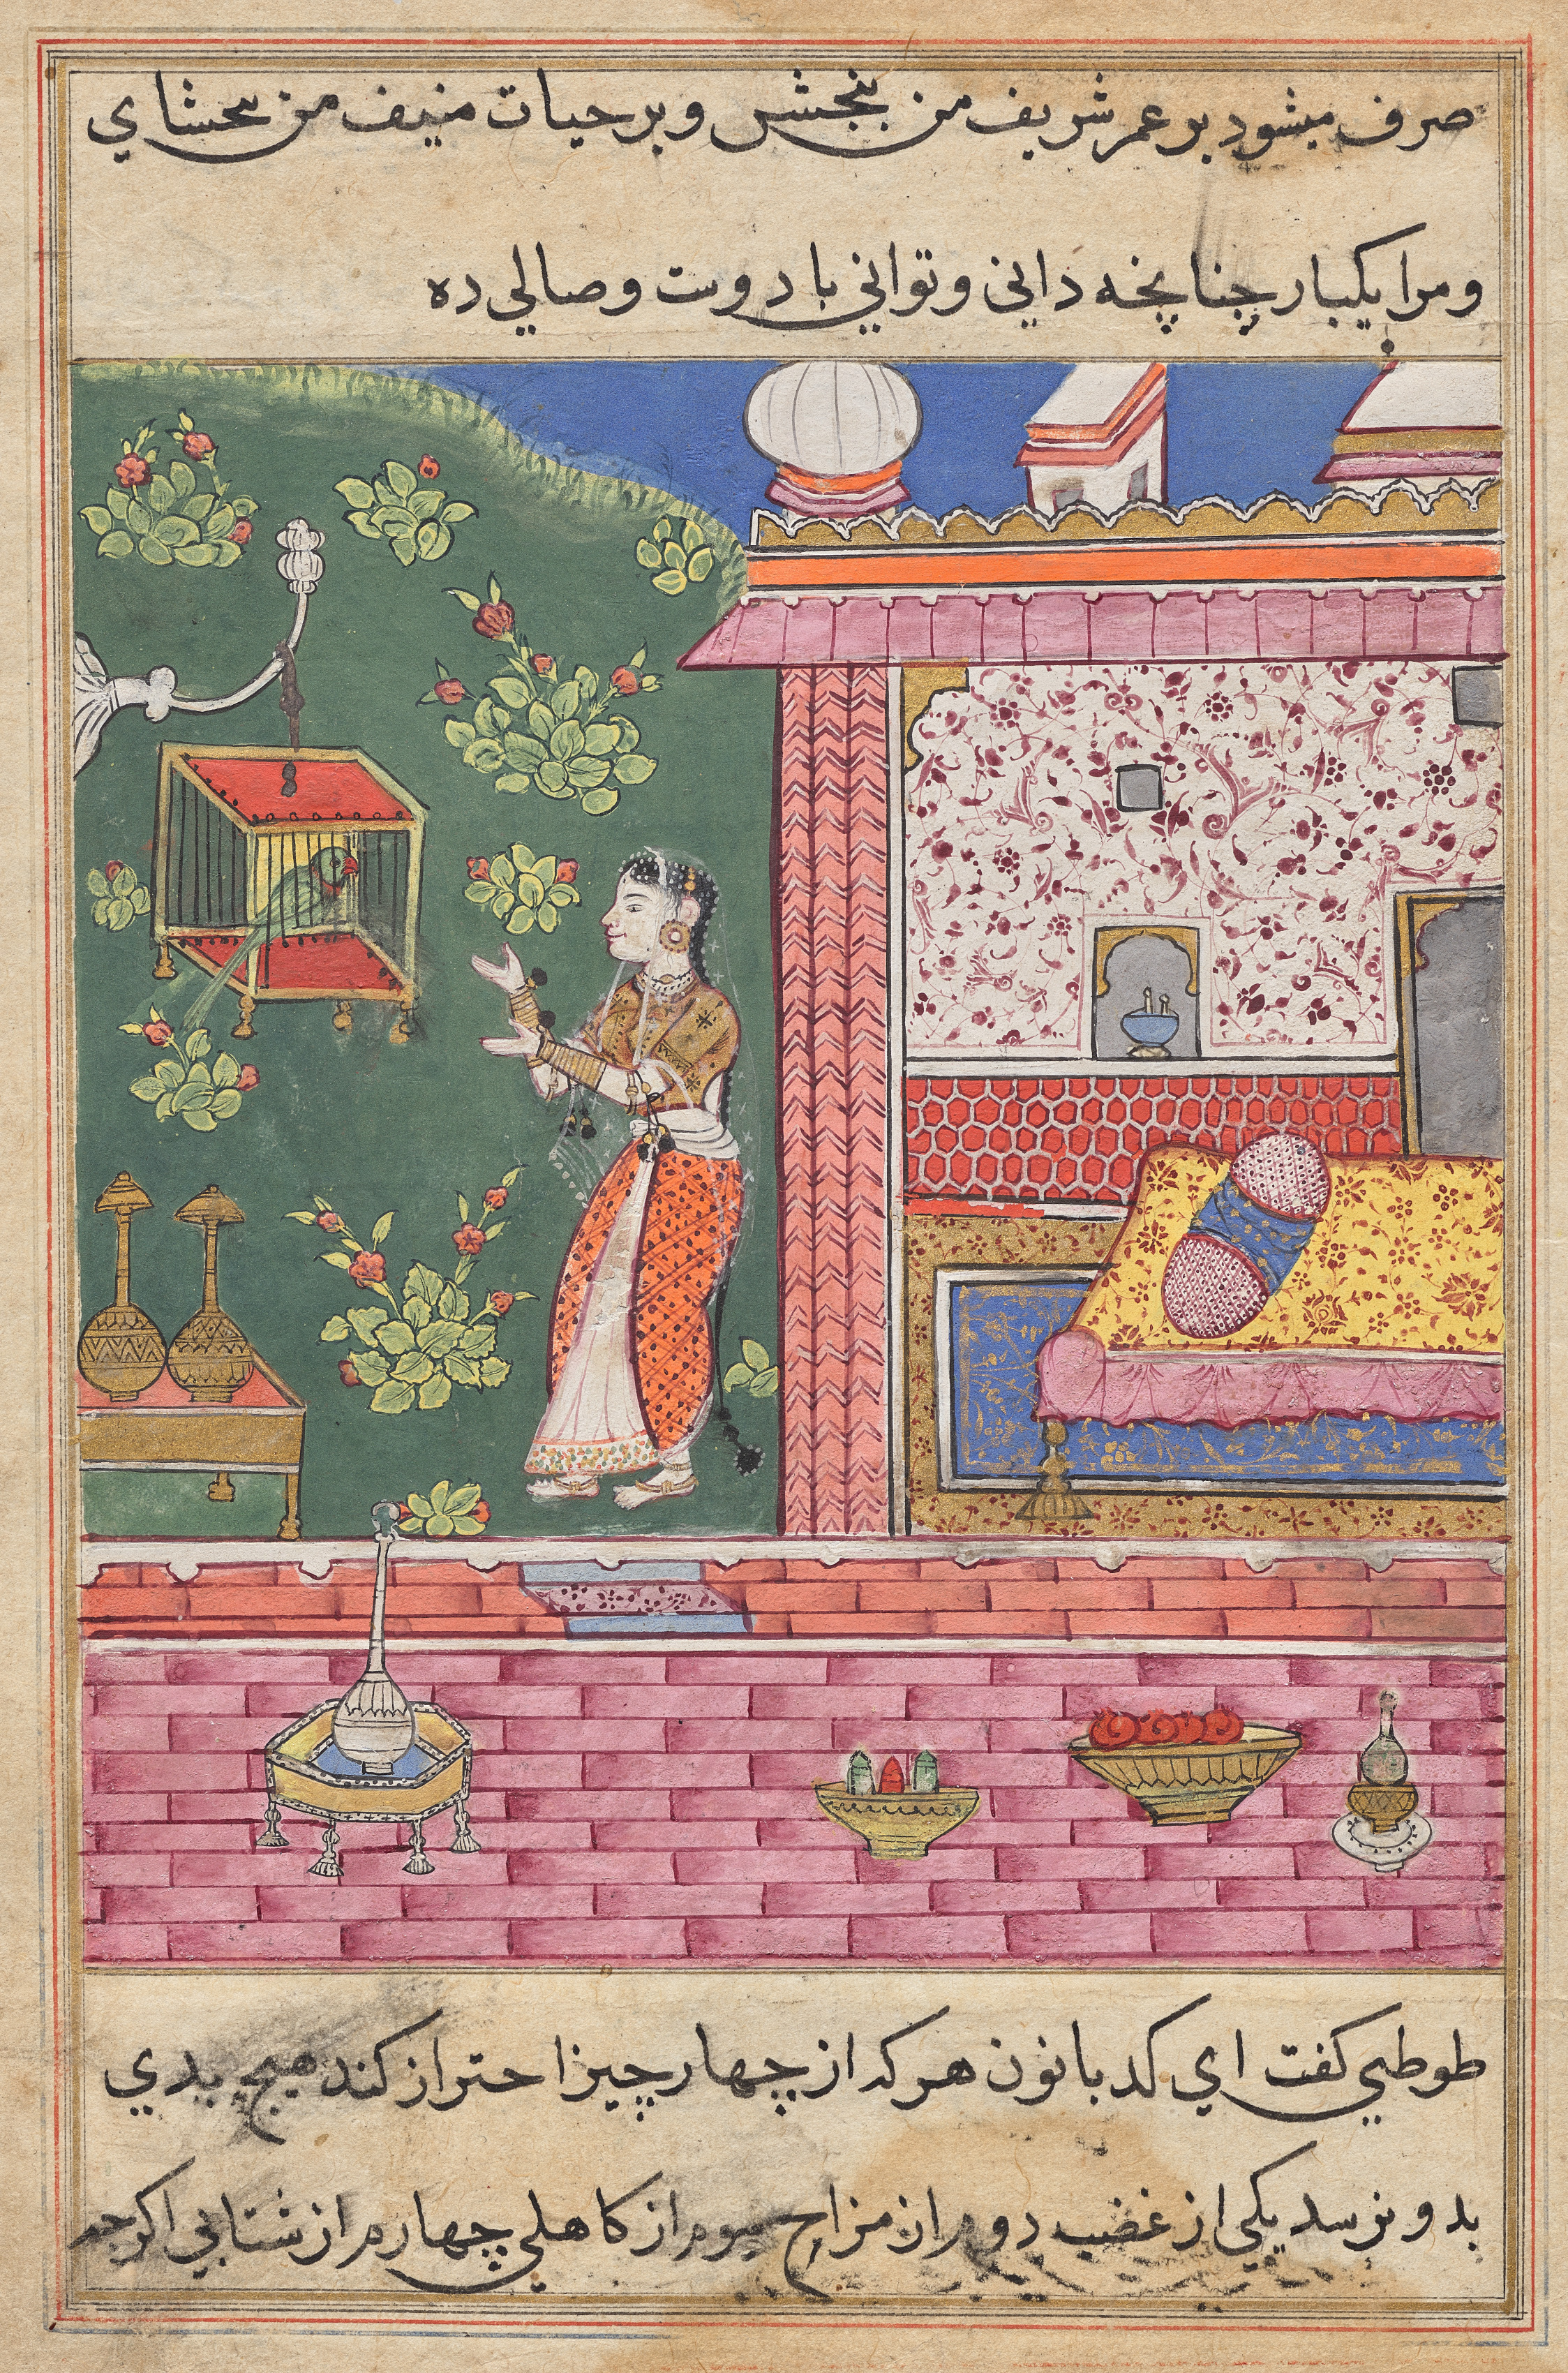 The Parrot Addresses Khujasta at the Beginning of the Thirtieth Night, from a Tuti-nama (Tales of a Parrot)